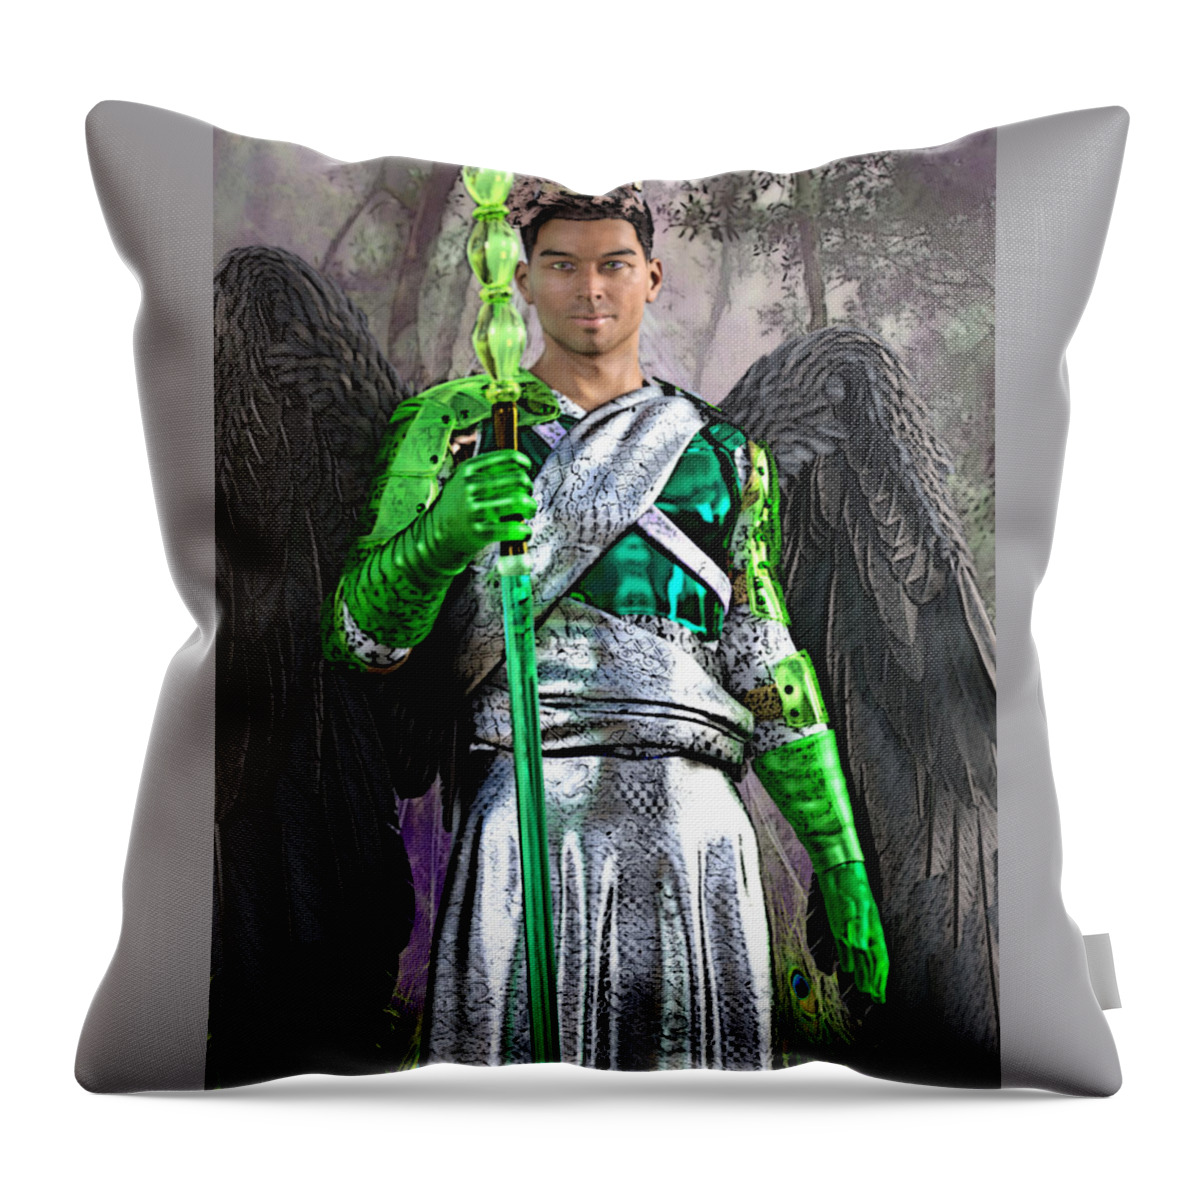 Angel Throw Pillow featuring the digital art Easter Poster by Suzanne Silvir